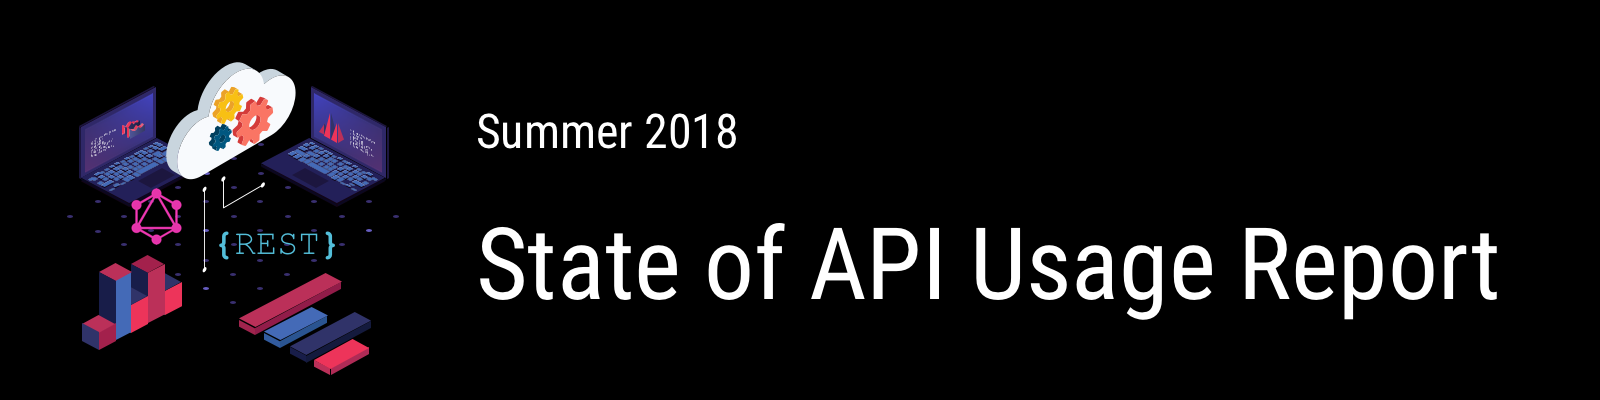 Summer 2018 - State of API Usage Report